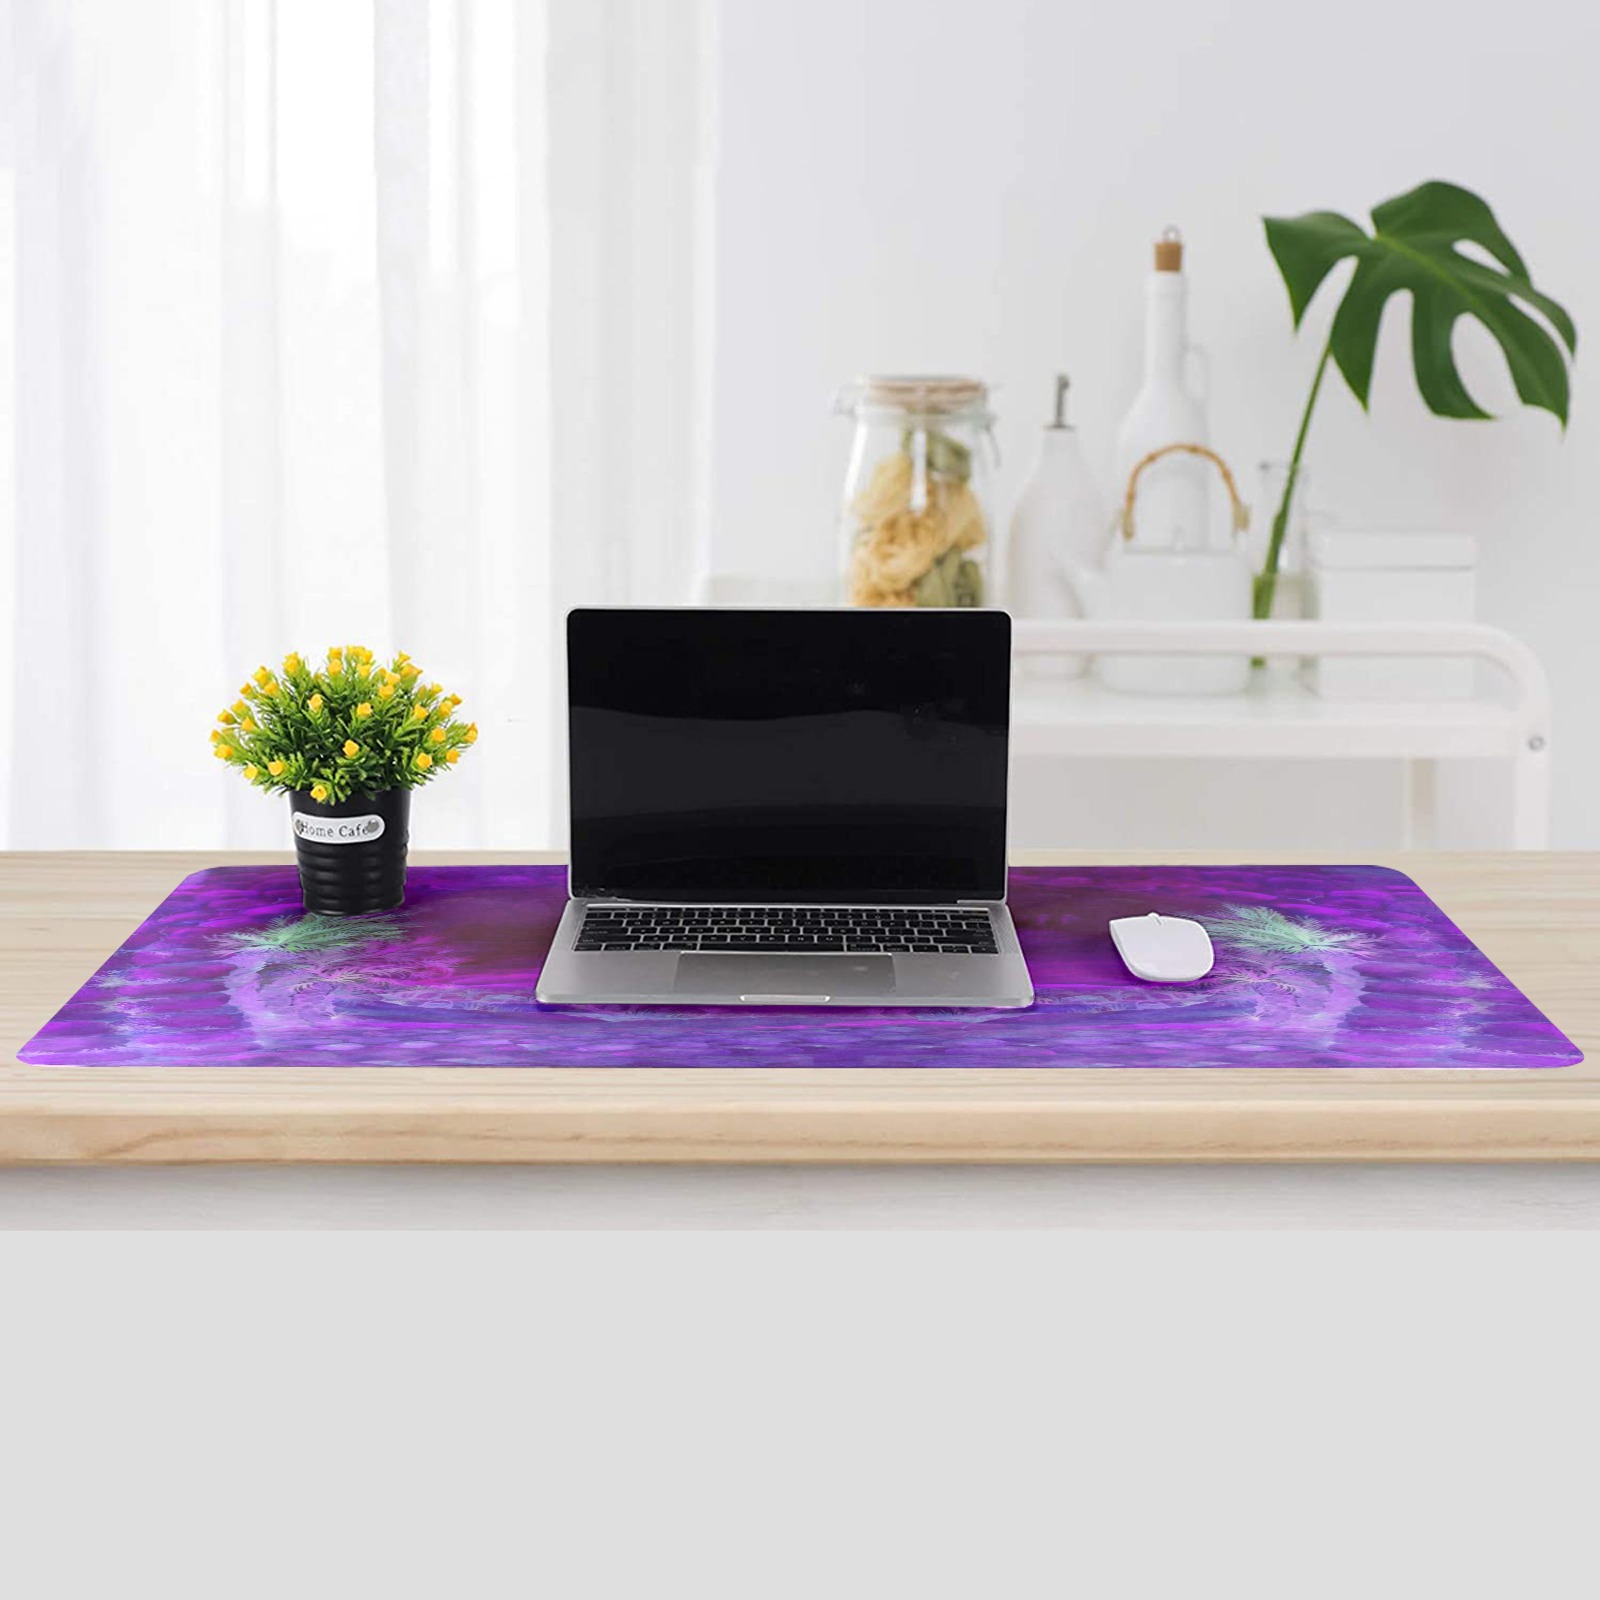 desert 7-35x16 inches Gaming Mousepad (35"x16")